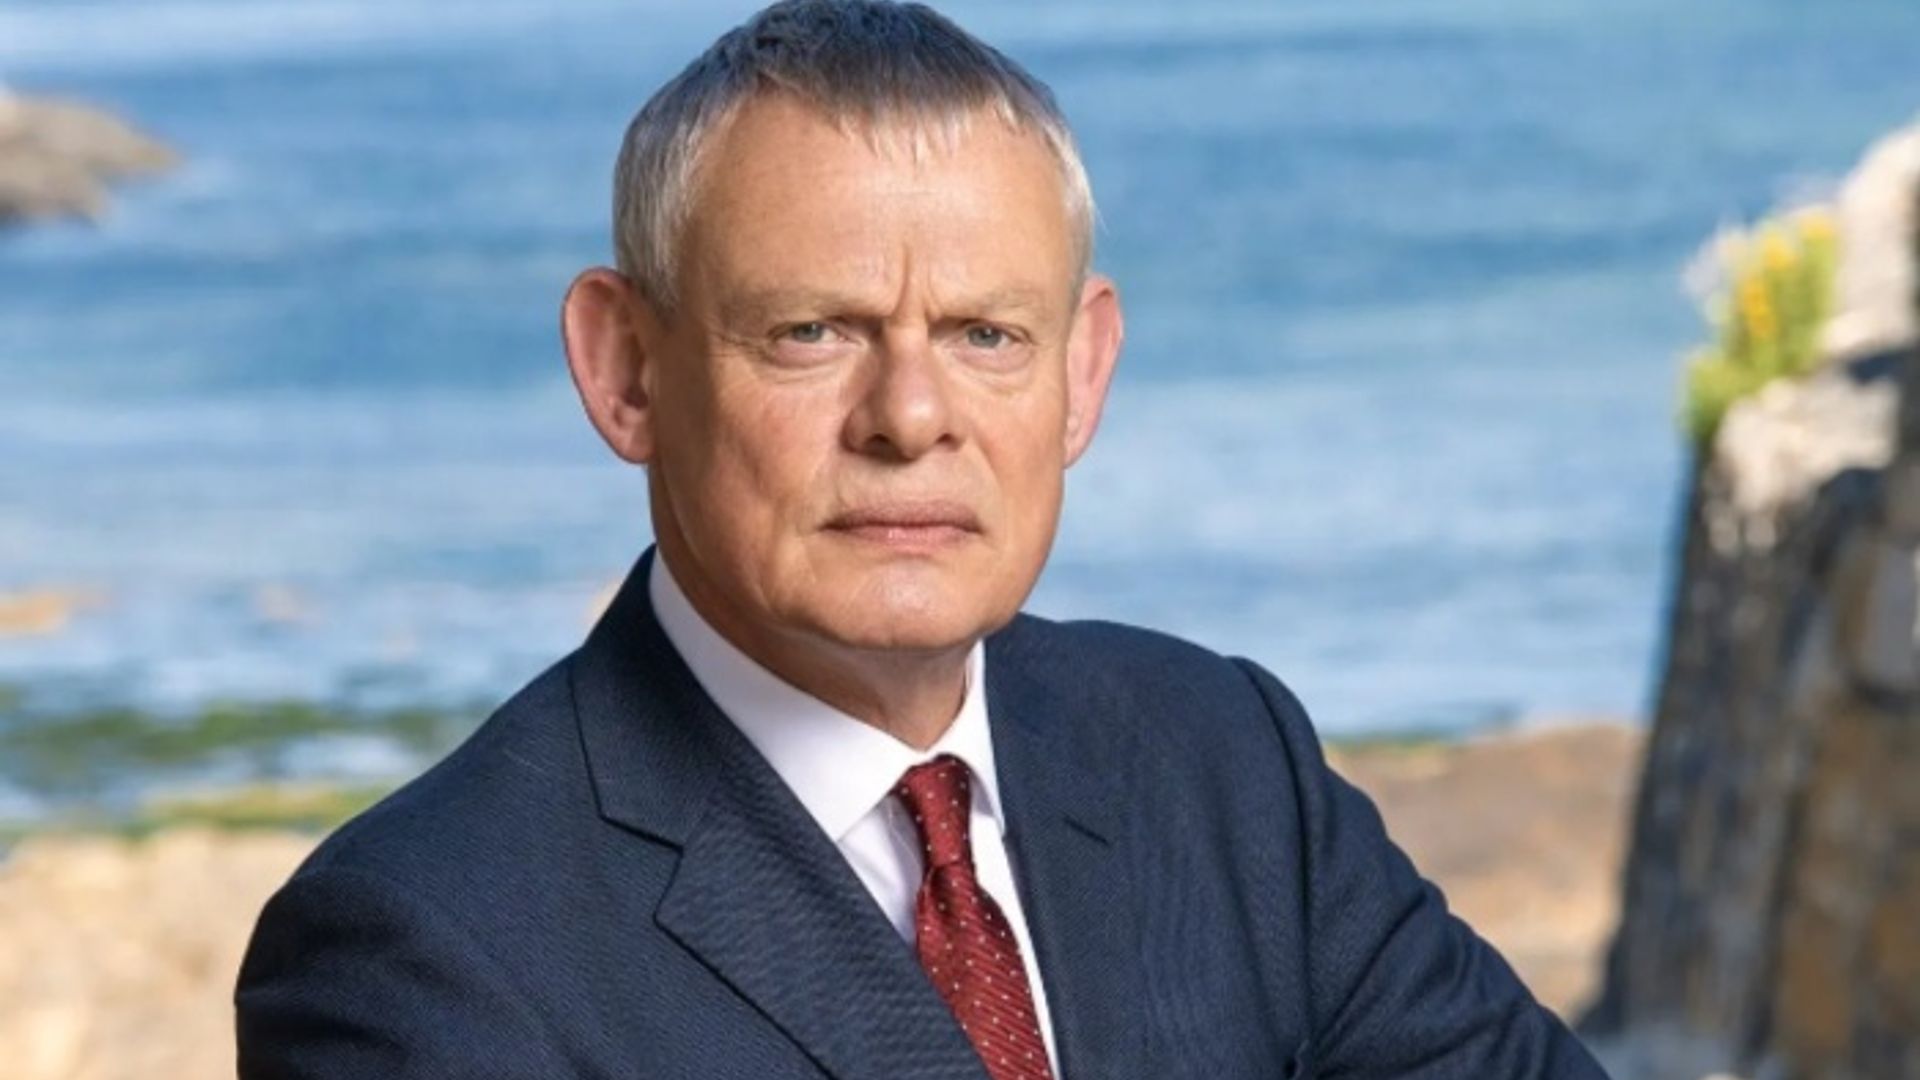 Martin Clunes’ new show away from Doc Martin - and it sounds amazing